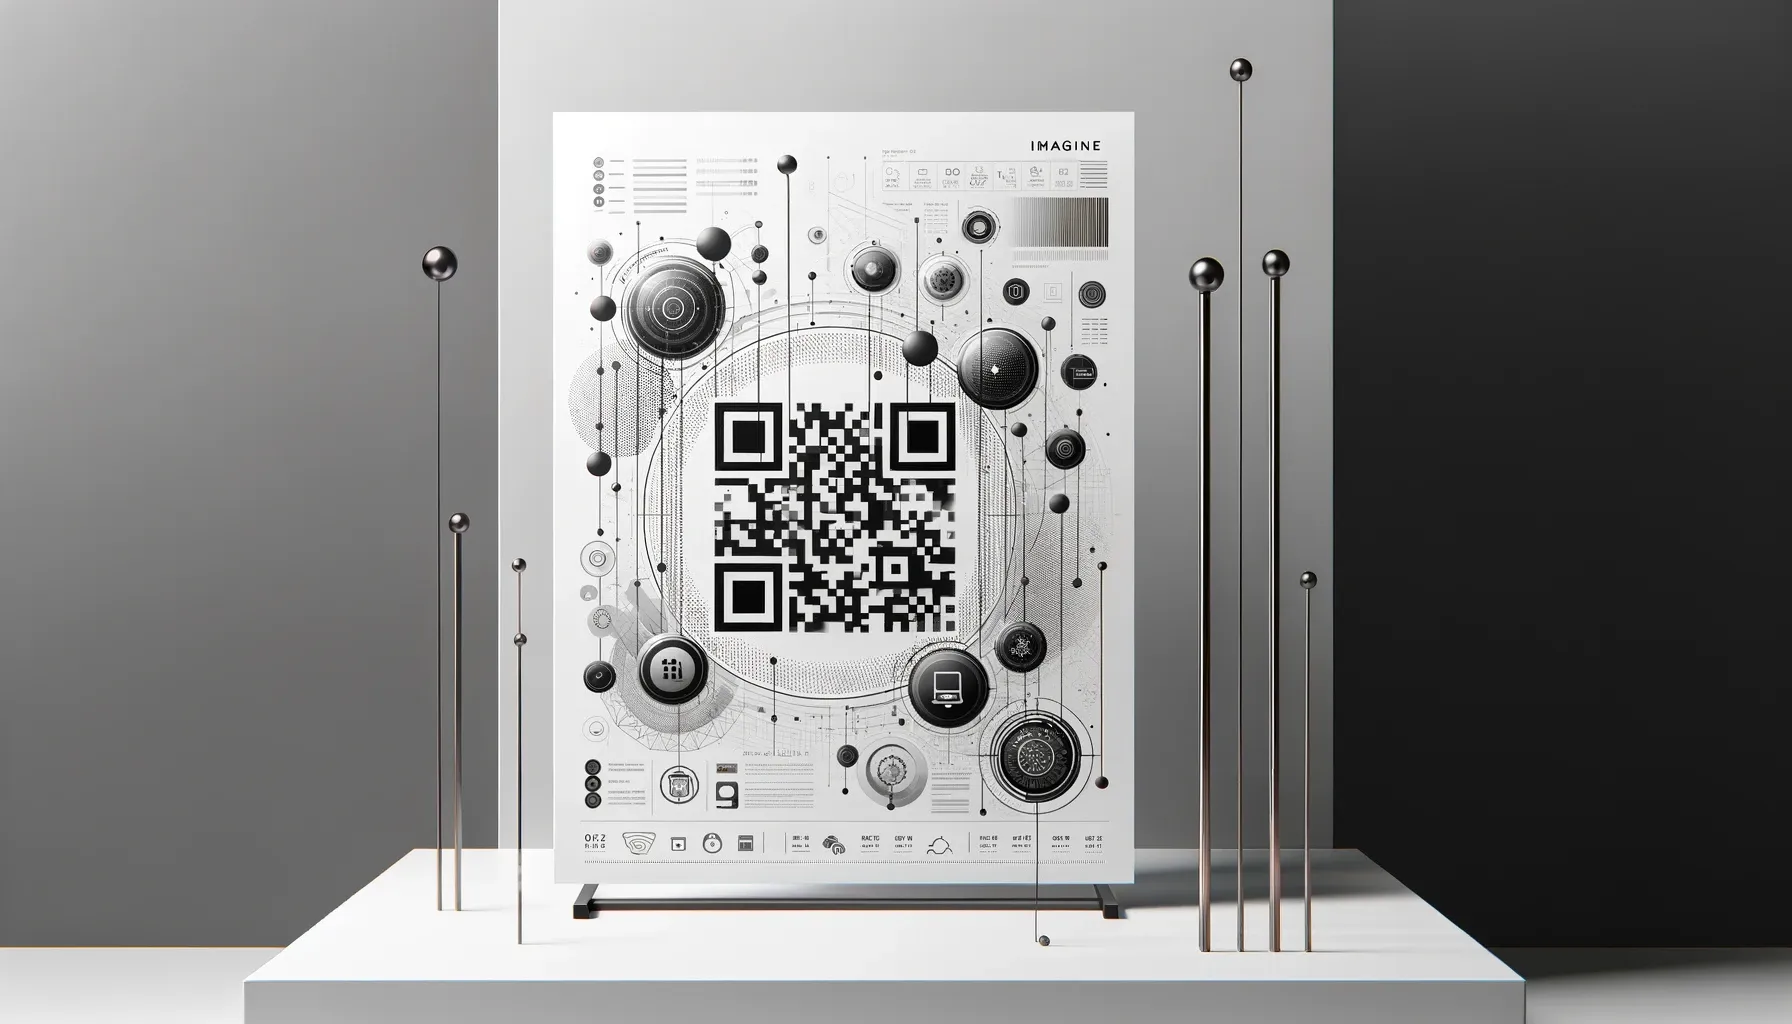 Black and white image of a poster that includes a QR code and abstract illustrations